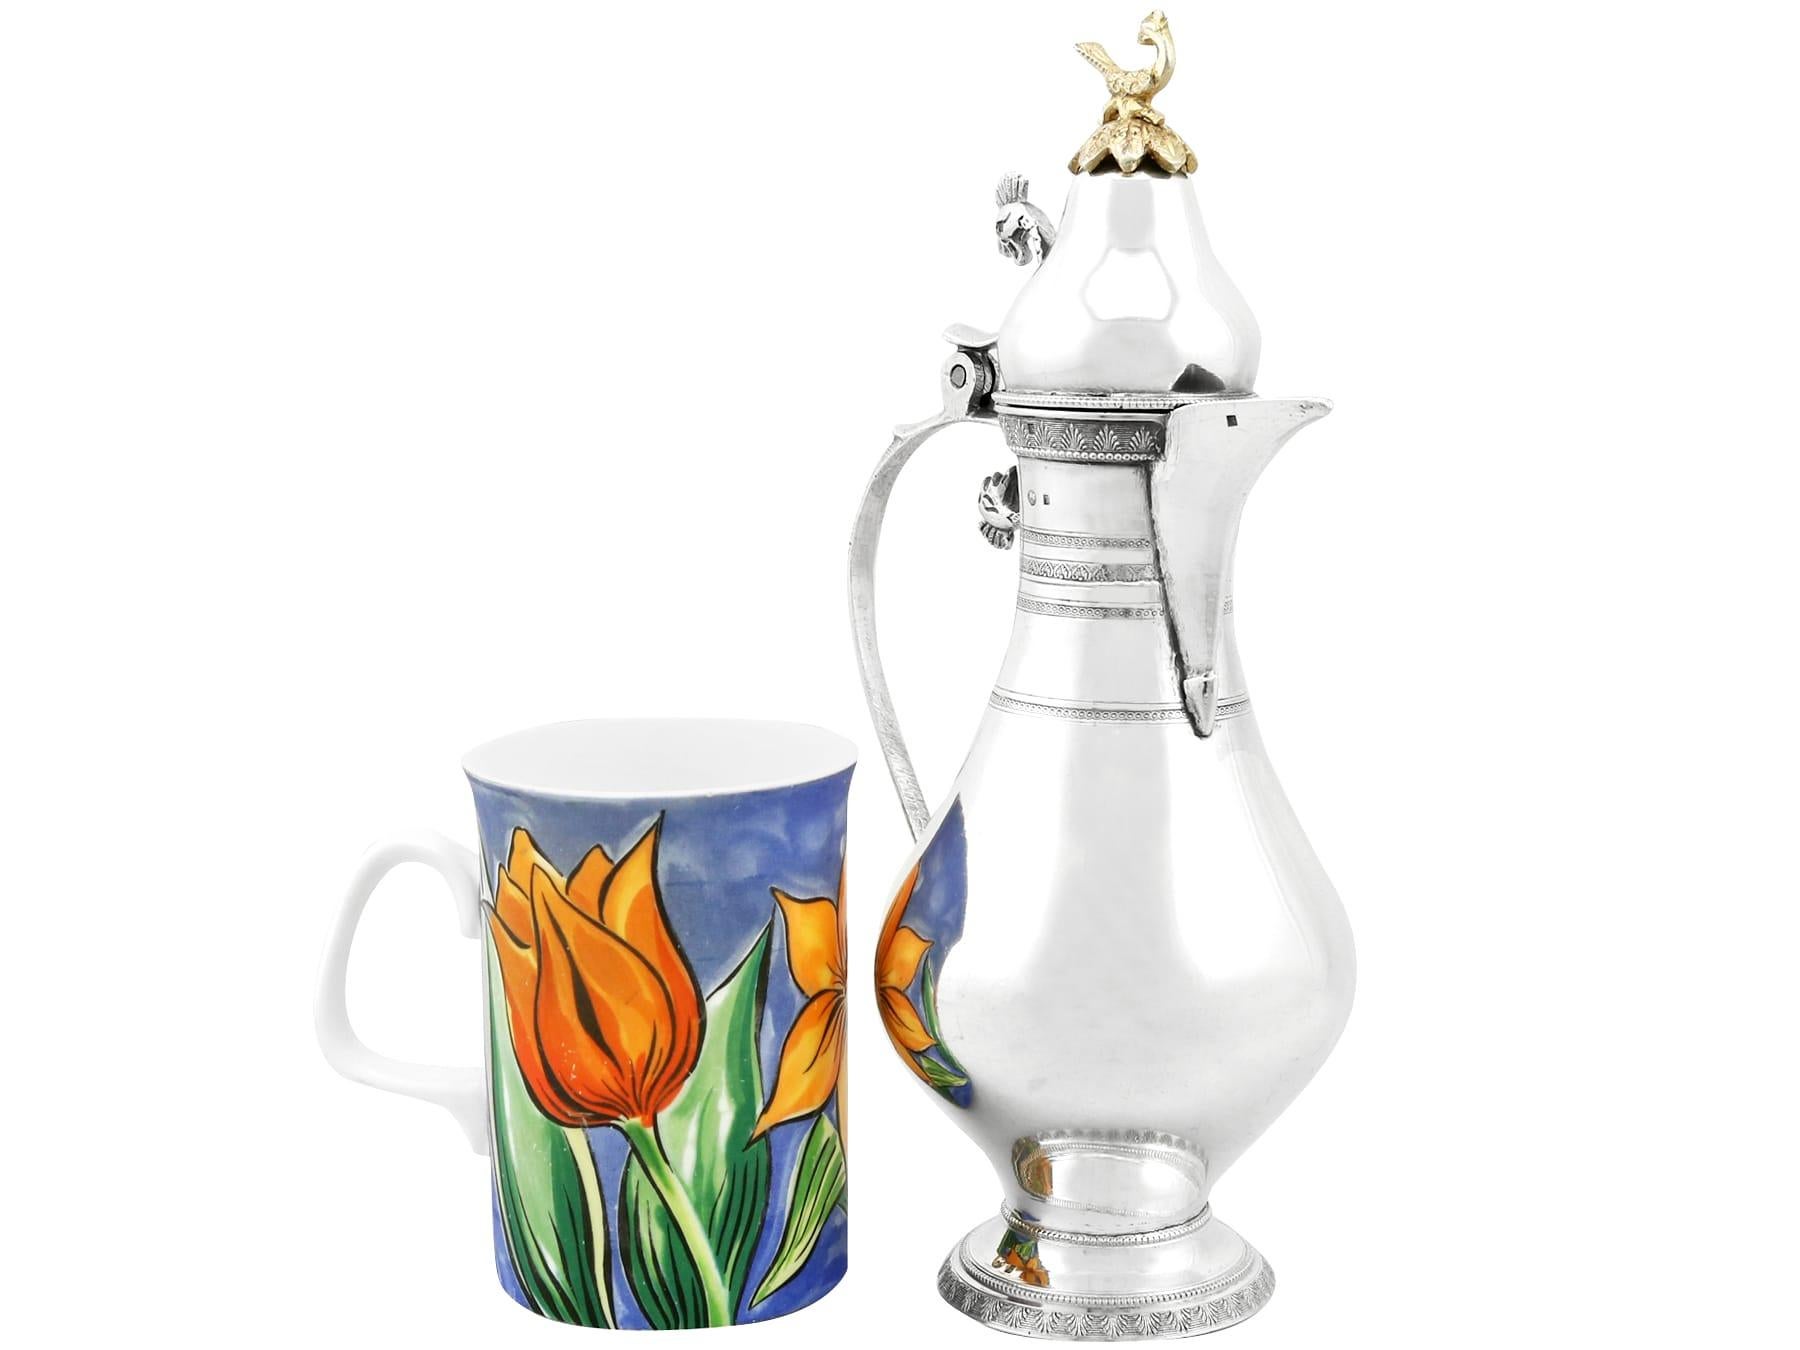 An exceptional, fine and impressive antique Turkish silver coffee jug; an addition to our silver teaware collection.

This exceptional antique Turkish silver coffee jug has a baluster shaped form to a circular spreading foot.

The surface of this